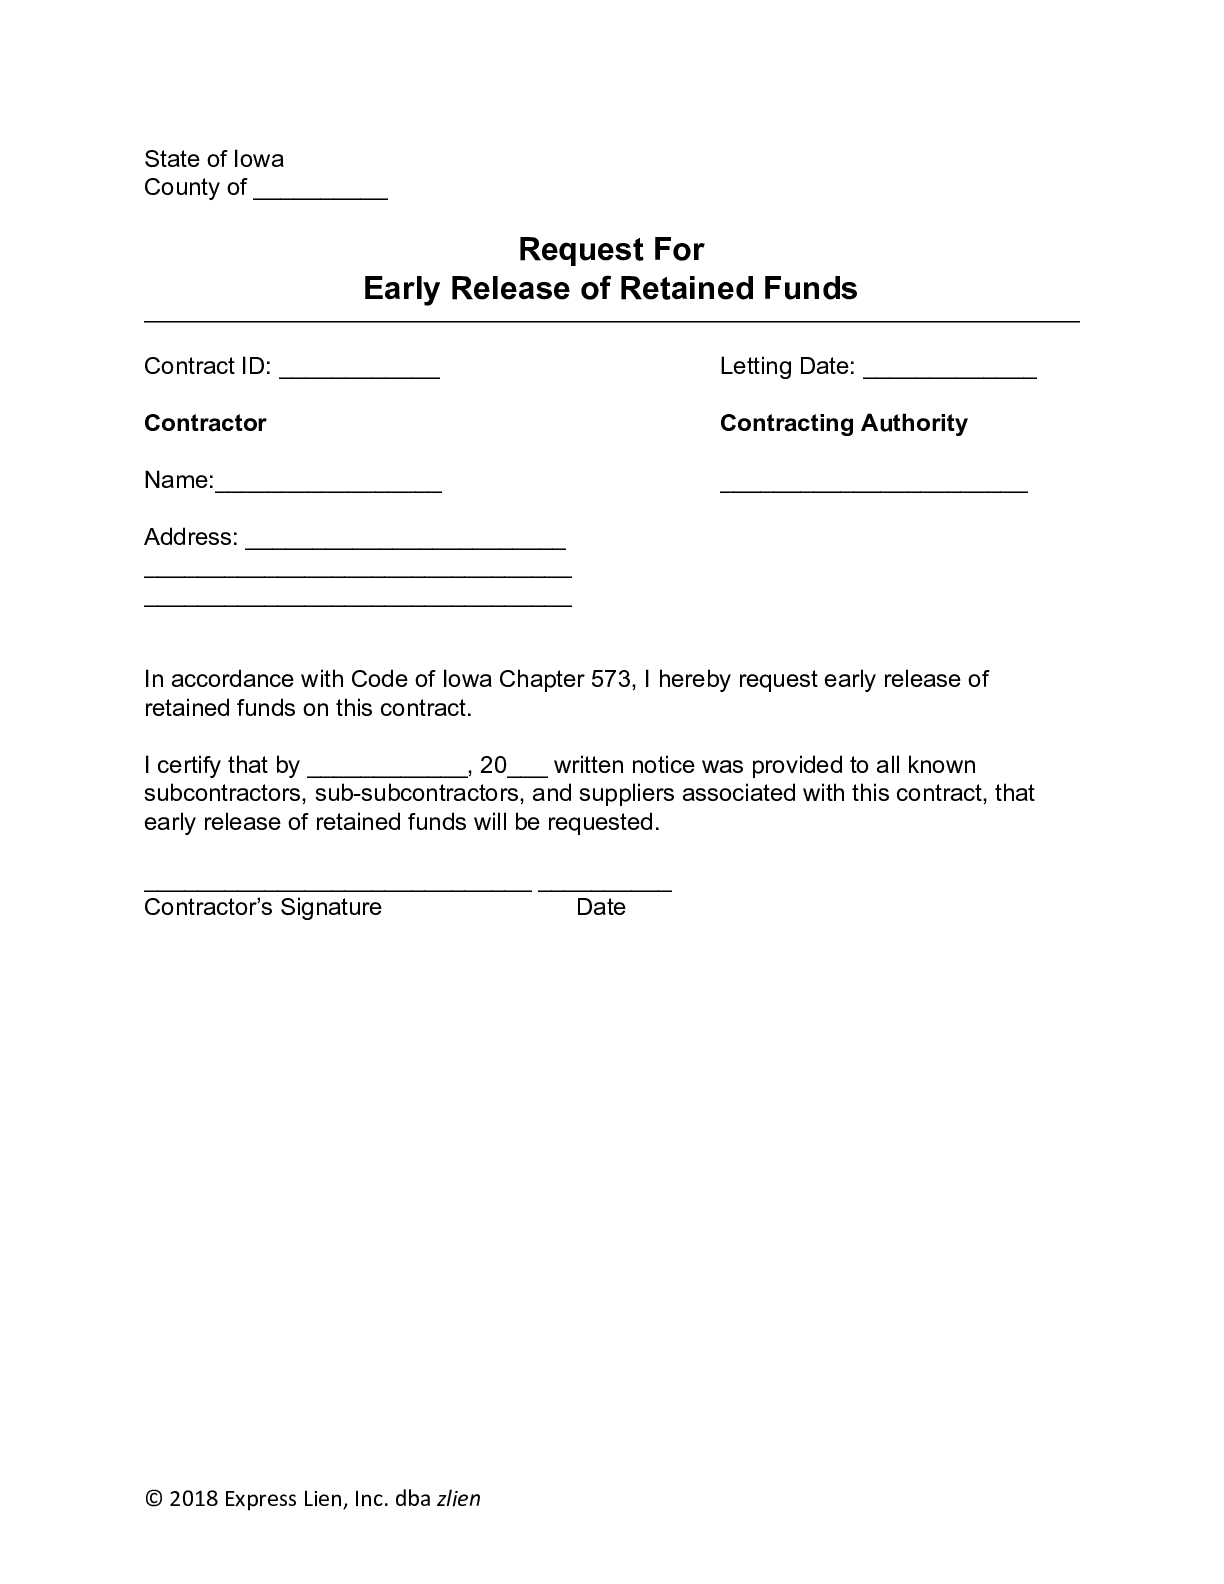 Iowa Contractor’s Request for Early Release of Retained Funds Form - free from